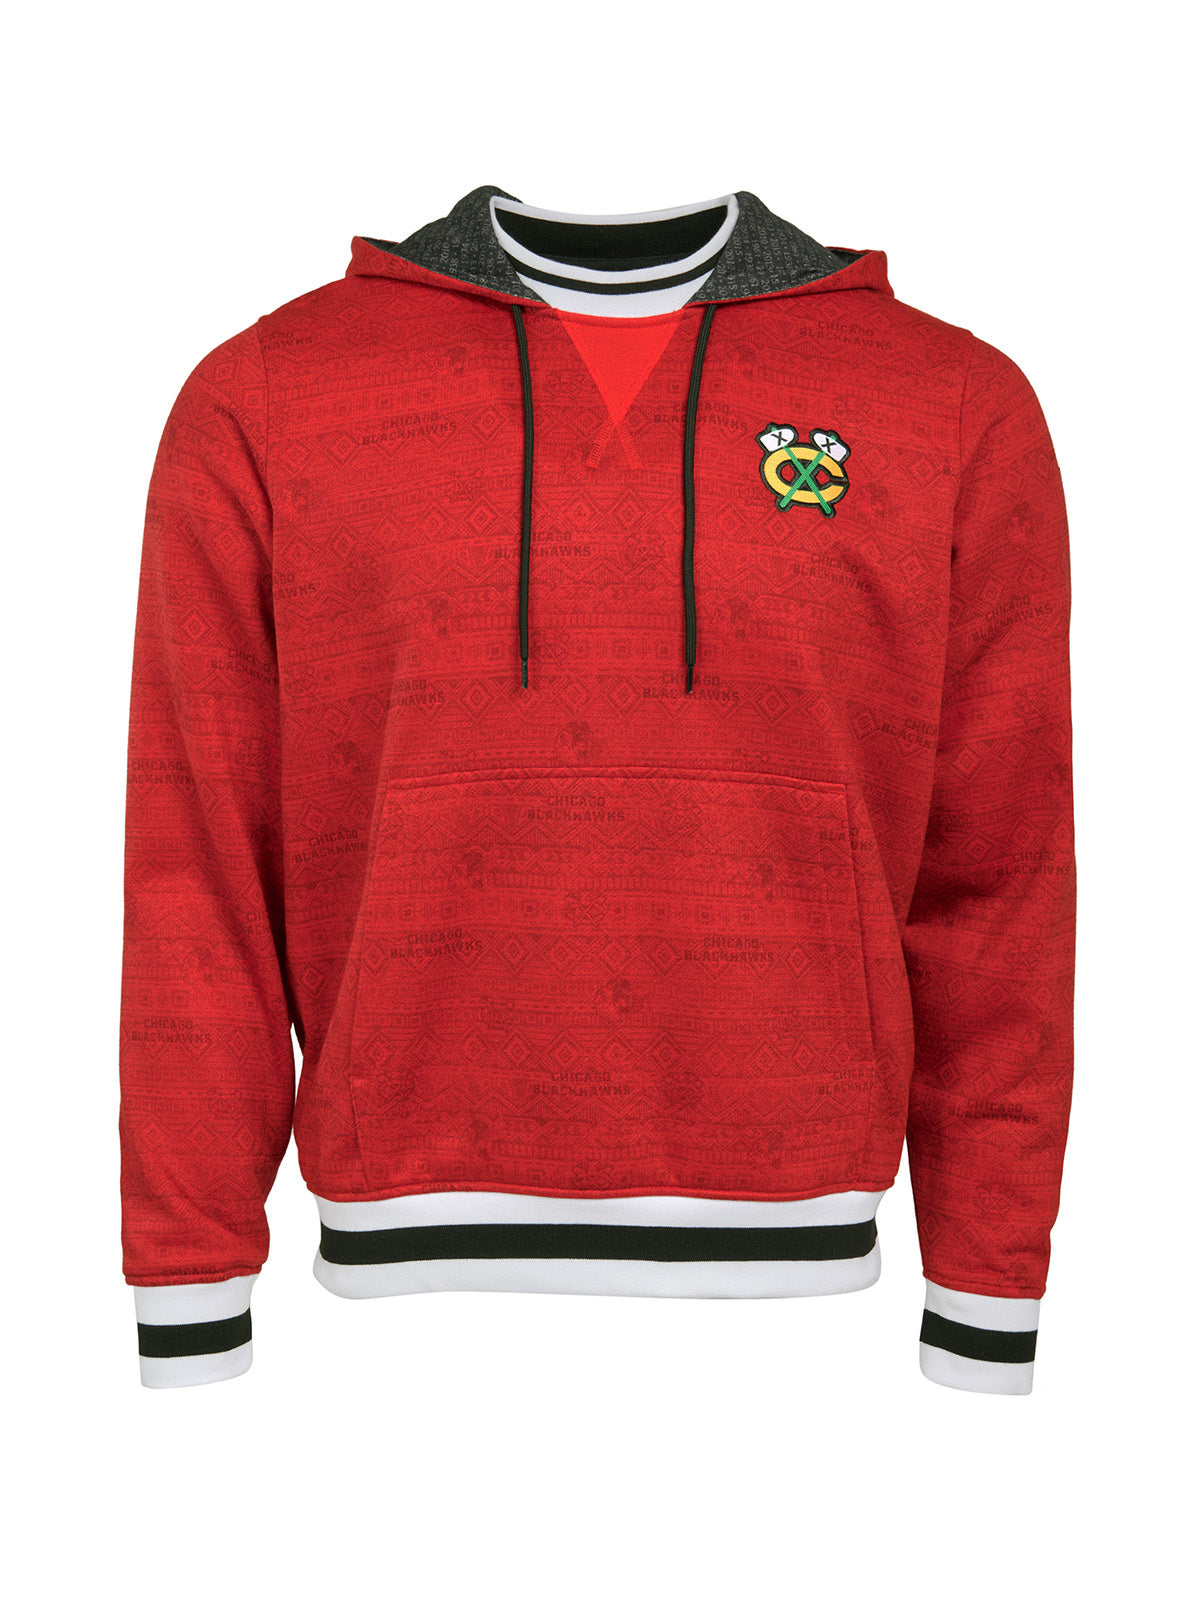 Chicago Blackhawks Hoodie - Show your team spirit, with the iconic team logo patch on the front left chest, and proudly display your Chicago Blackhawks support in their team colors with this NHL hockey hoodie.